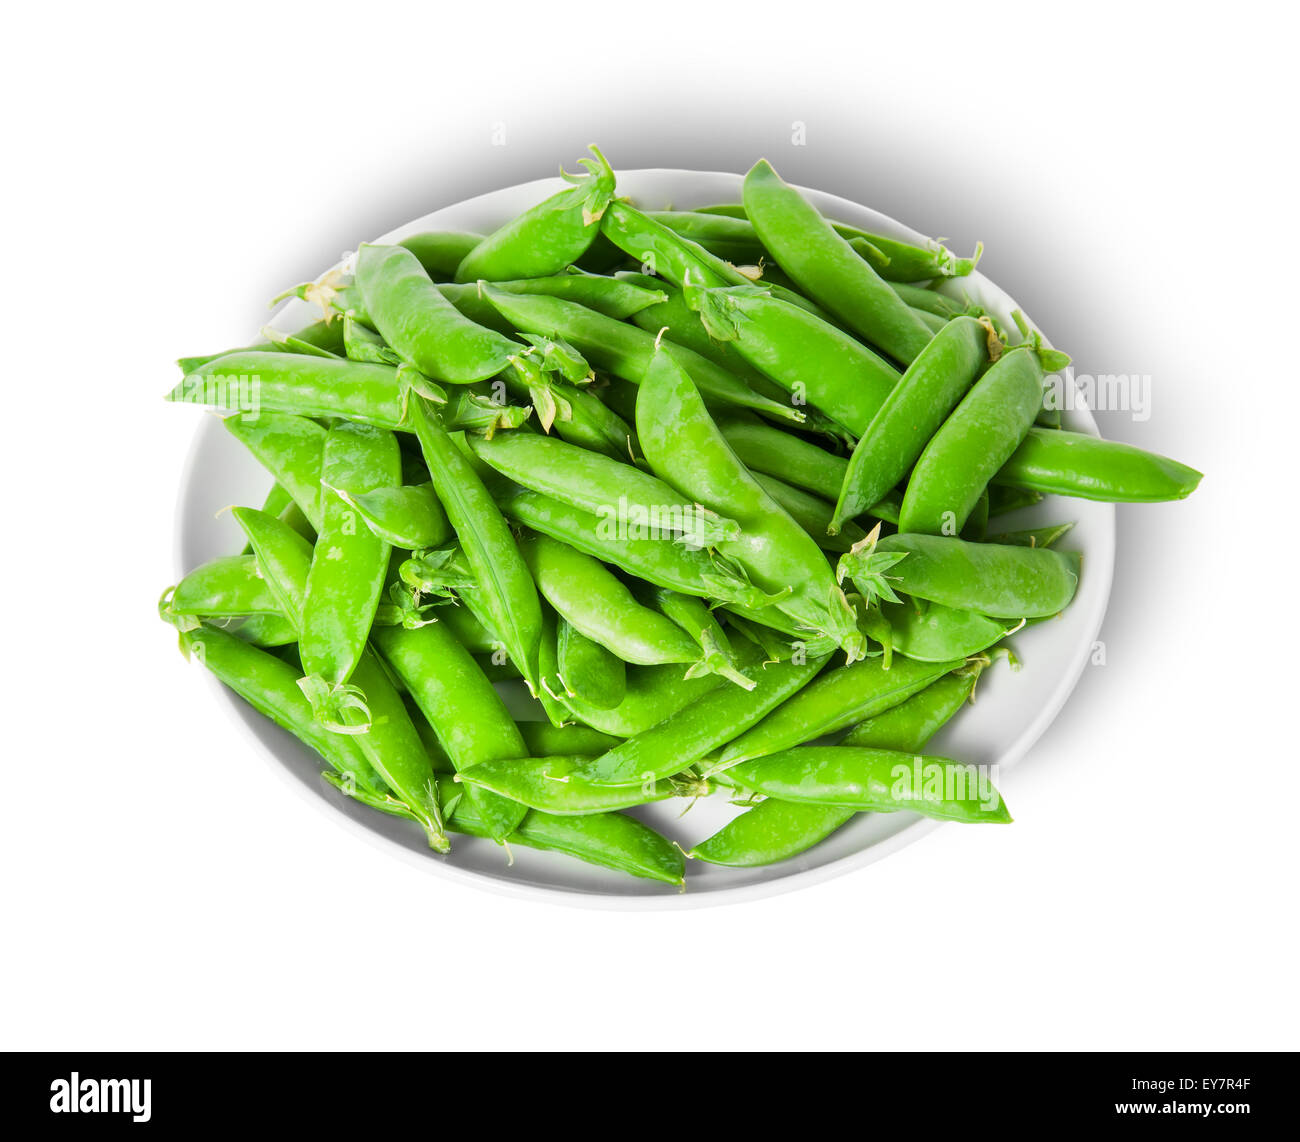 Small pile of green peas in pods on white plate isolated on white background Stock Photo